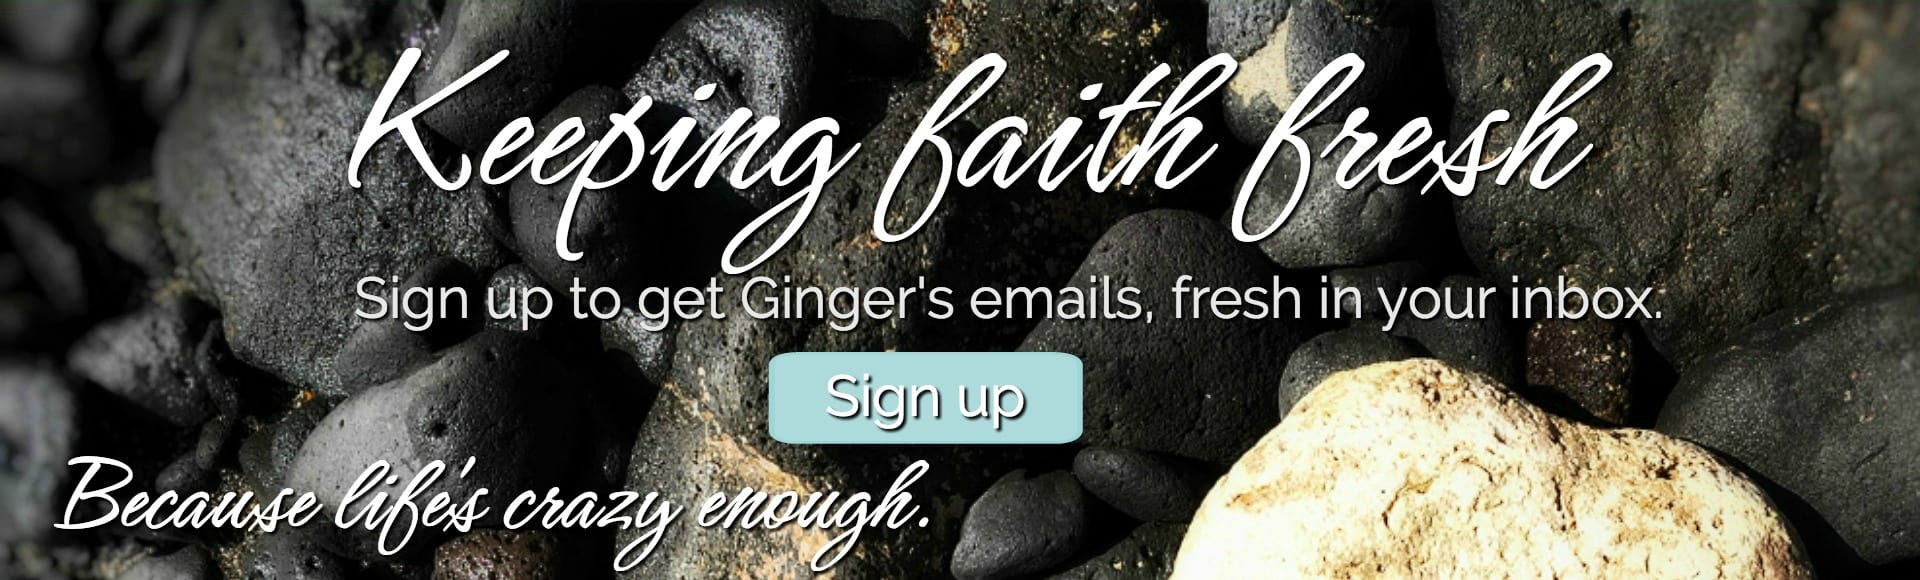 Sign up for Ginger's emails.